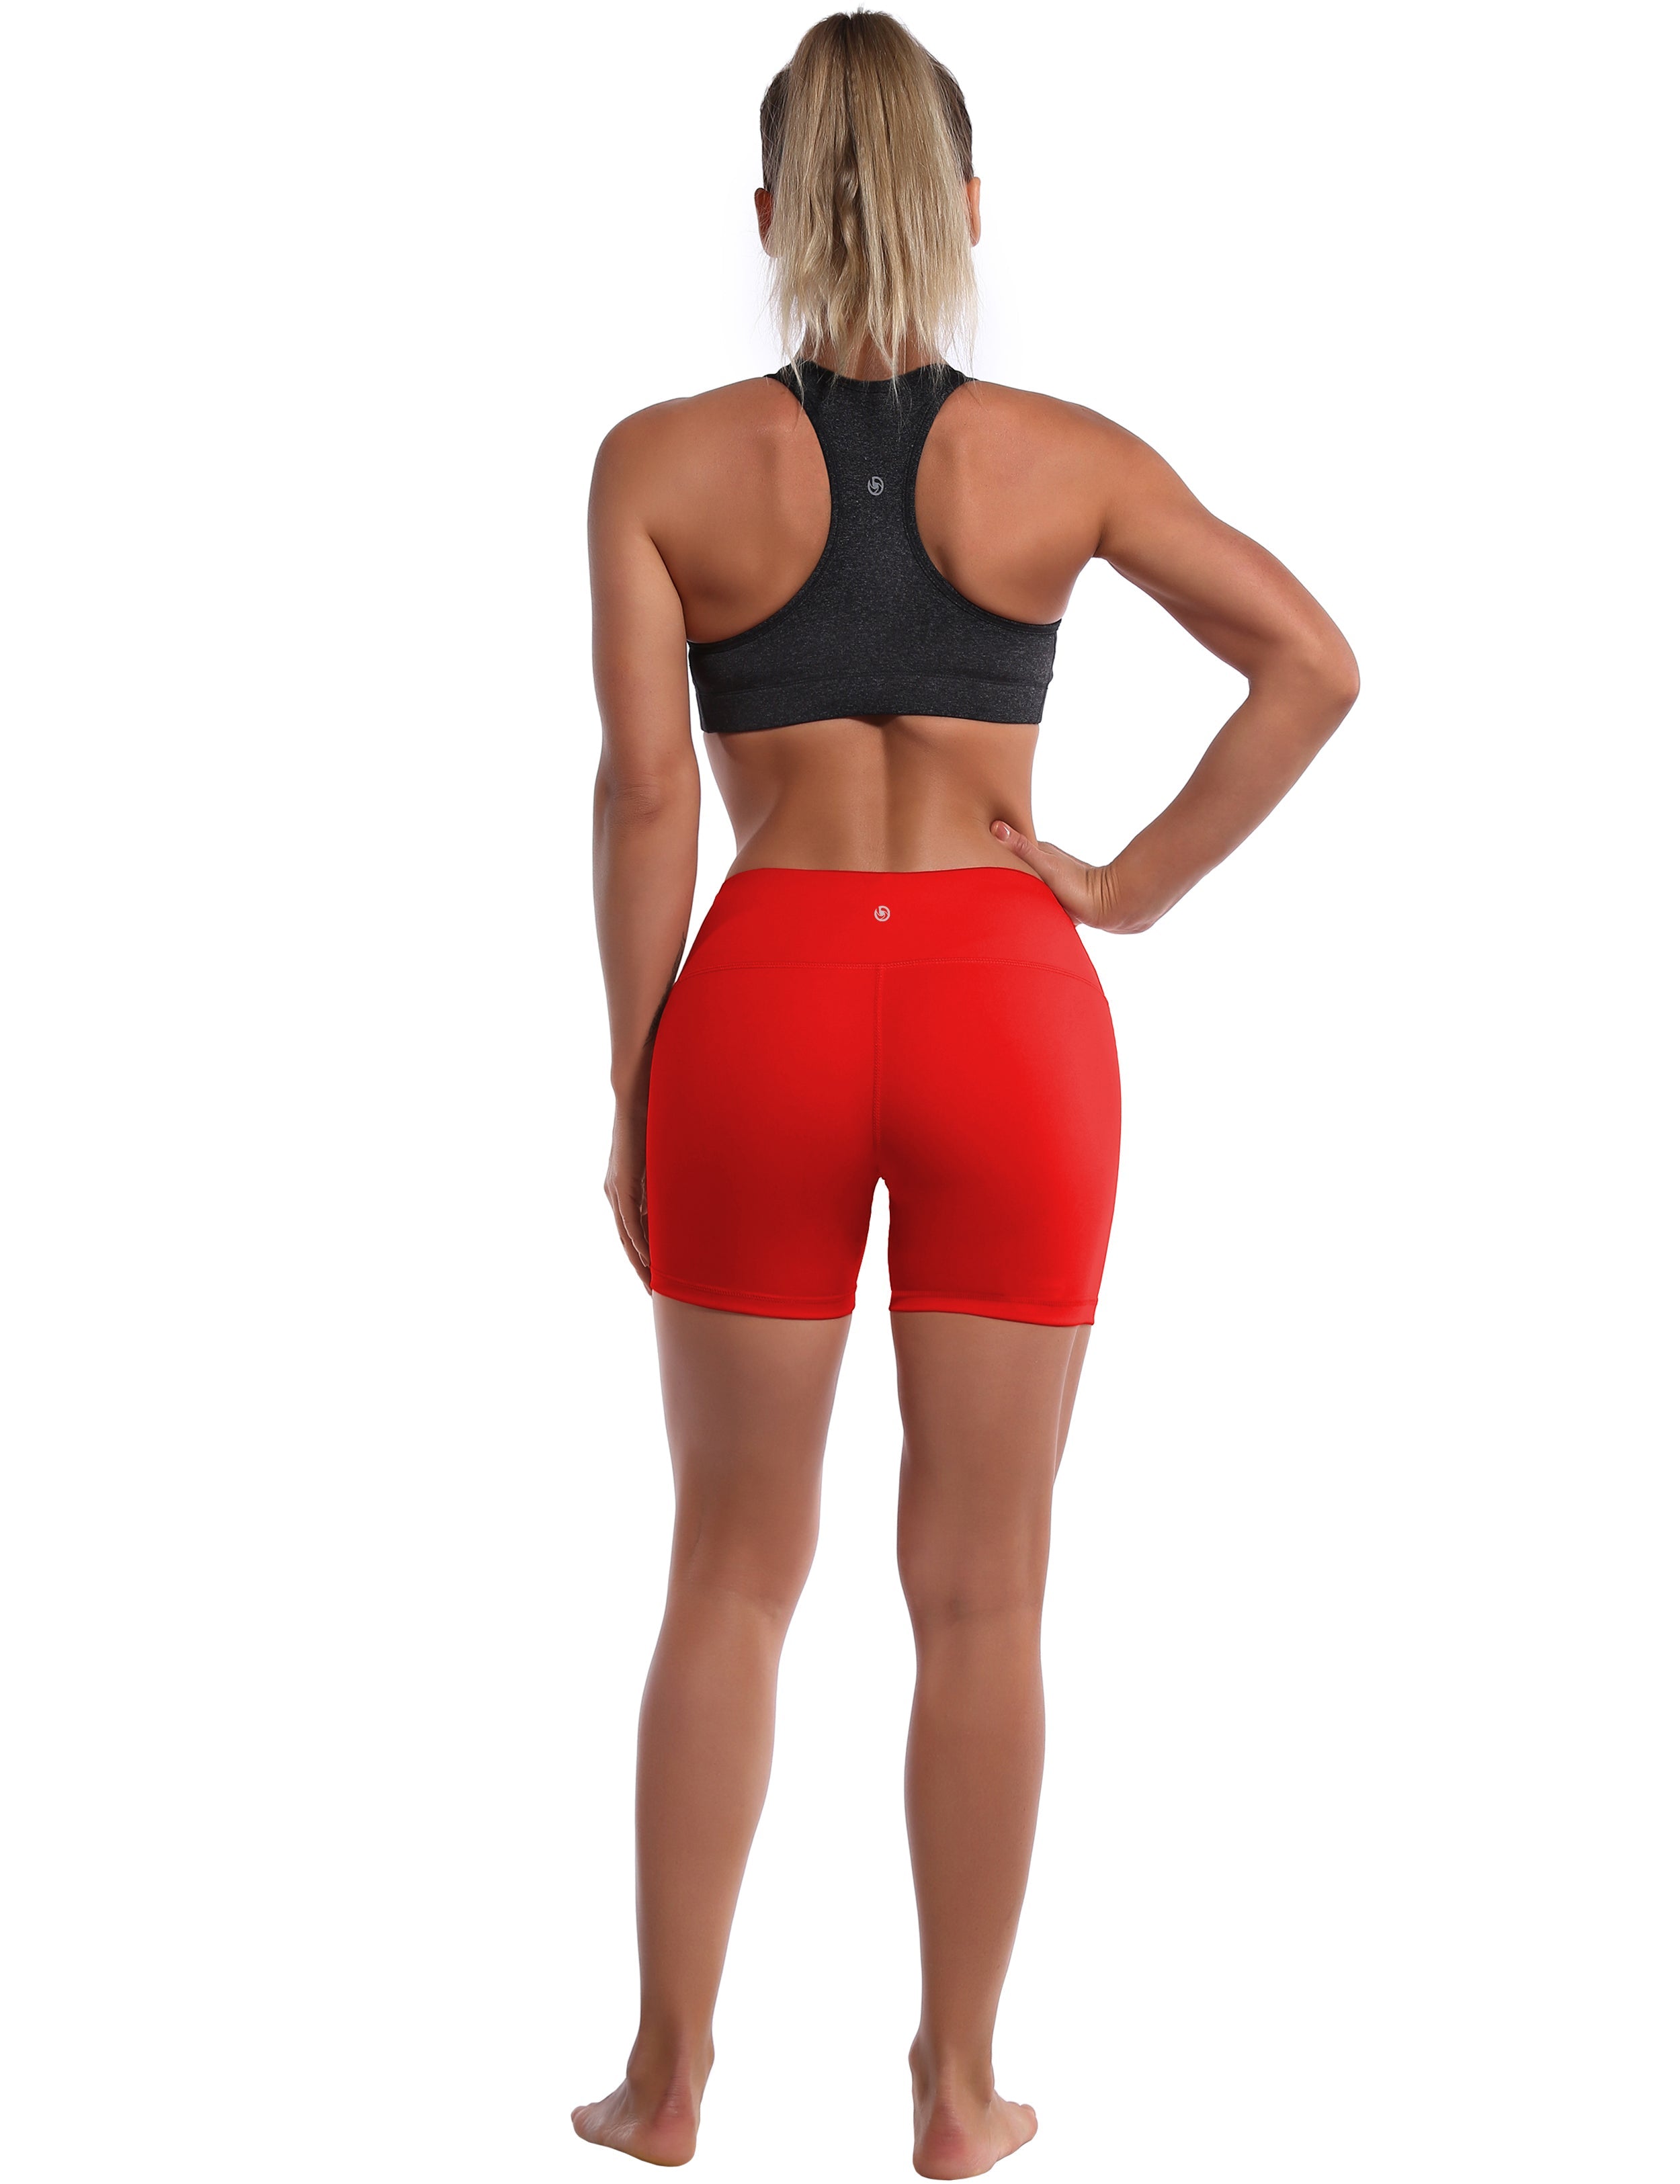 4" Jogging Shorts scarlet Sleek, soft, smooth and totally comfortable: our newest style is here. Softest-ever fabric High elasticity High density 4-way stretch Fabric doesn't attract lint easily No see-through Moisture-wicking Machine wash 75% Nylon, 25% Spandex